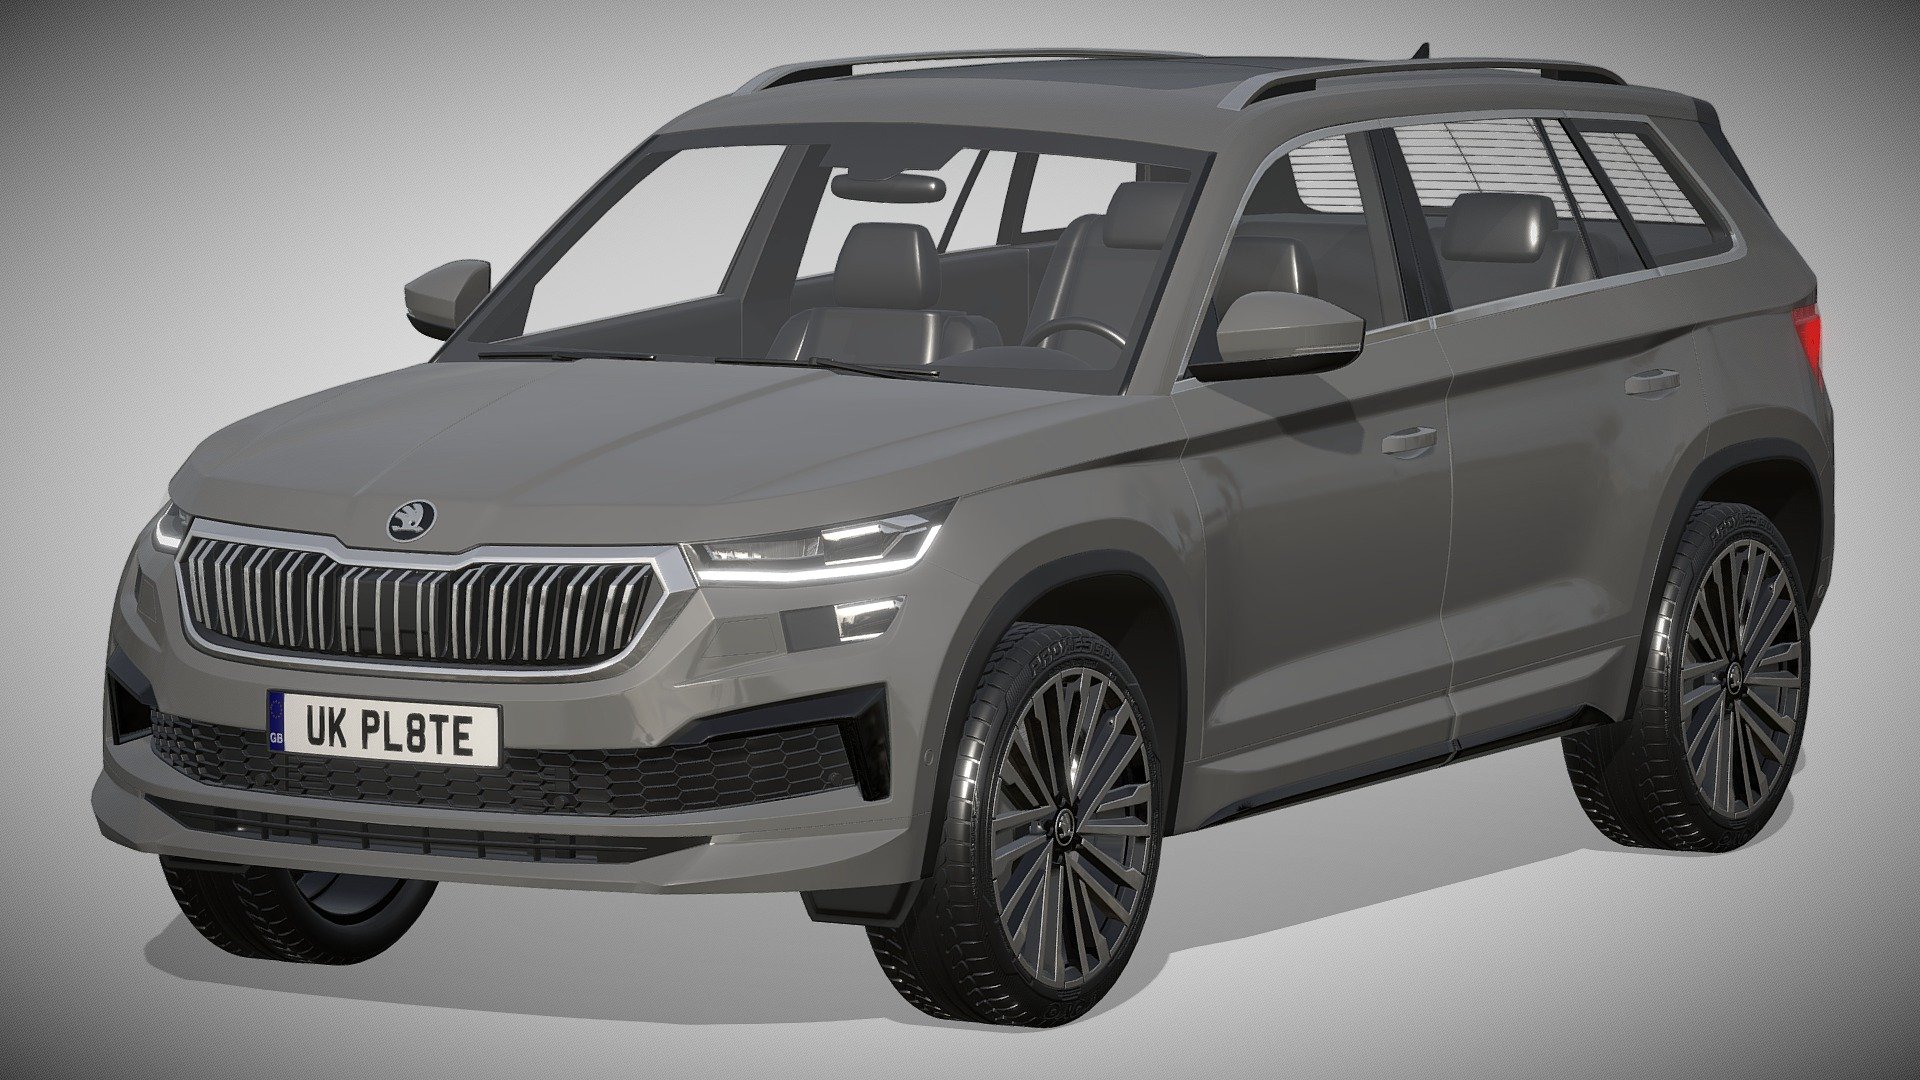 Skoda KODIAQ 2022

https://www.skoda-auto.com/models/range/kodiaq

Clean geometry Light weight model, yet completely detailed for HI-Res renders. Use for movies, Advertisements or games

Corona render and materials

All textures include in *.rar files

Lighting setup is not included in the file! - Skoda KODIAQ 2022 - Buy Royalty Free 3D model by zifir3d 3d model